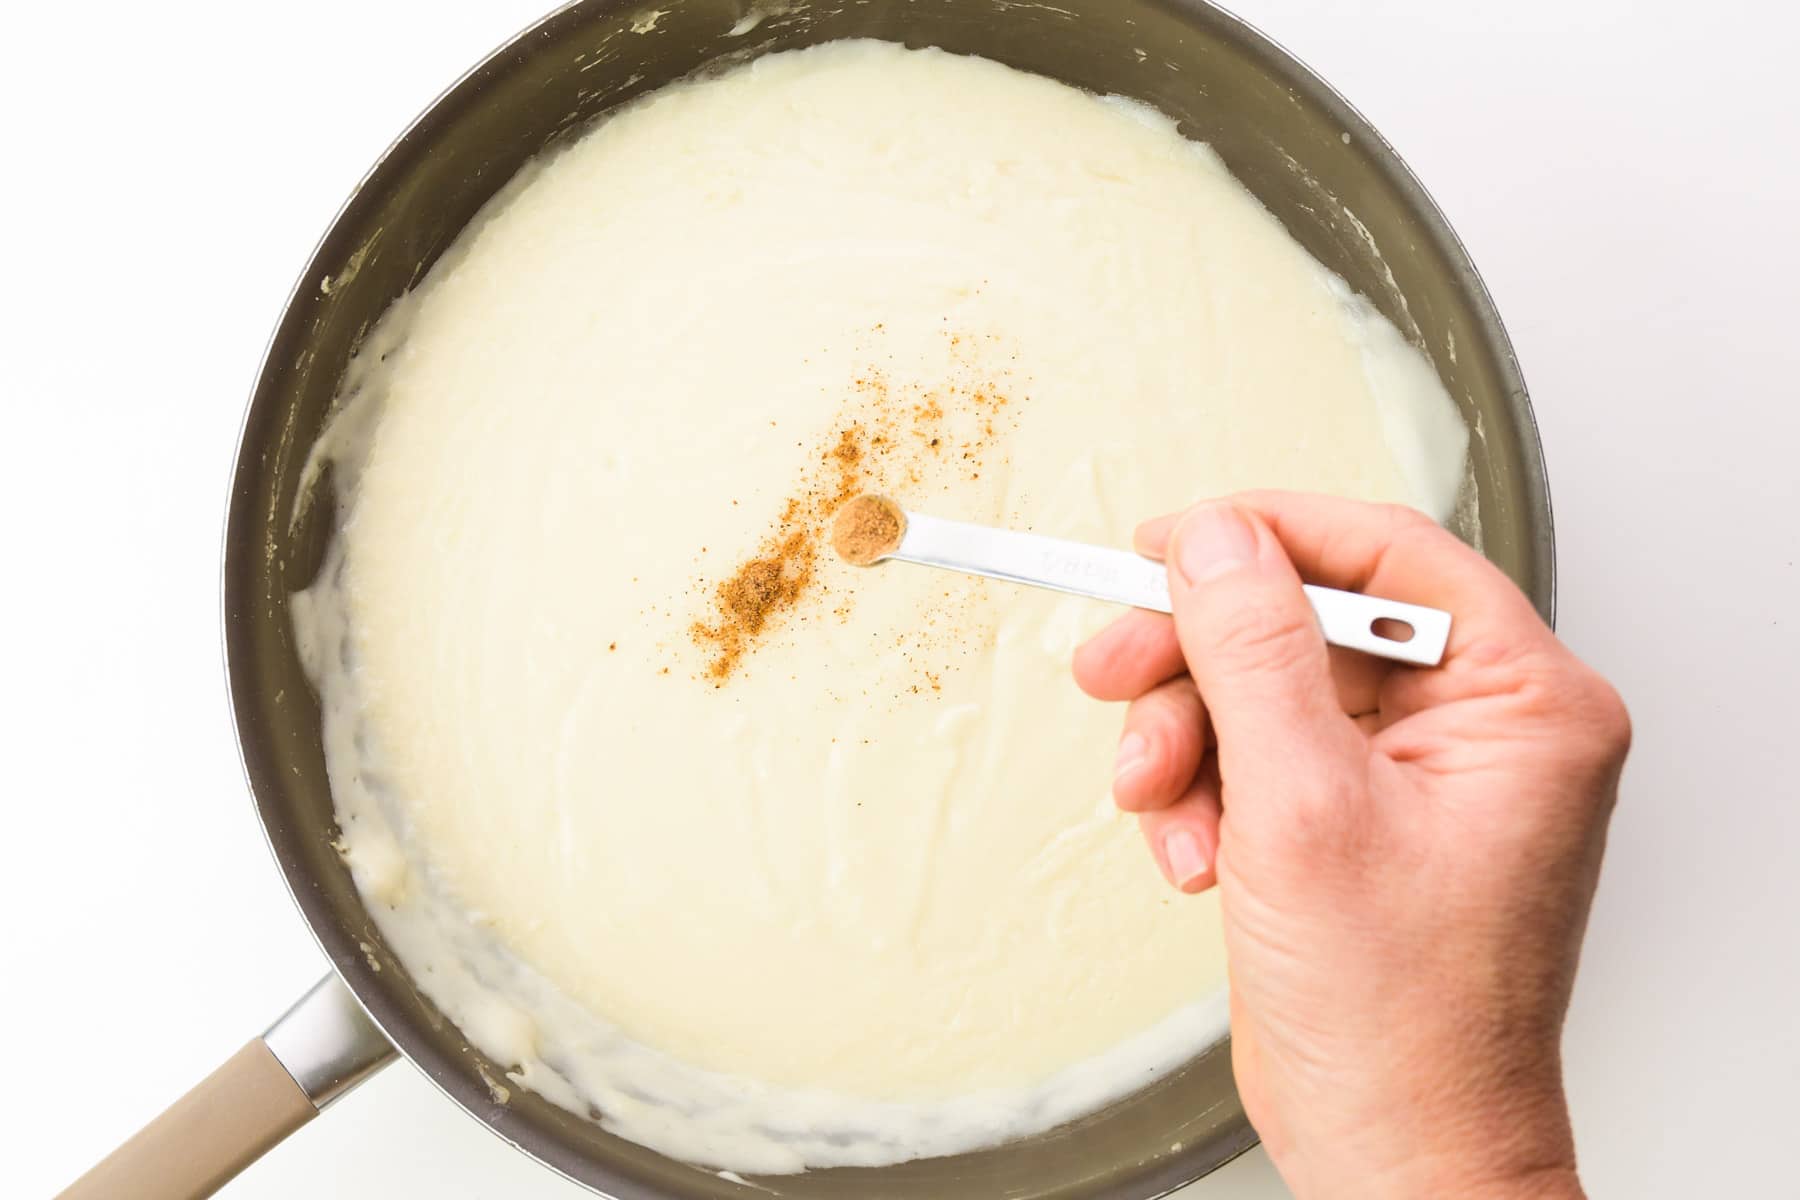 There's a measuring spoon in one hand, sprinkling ground nutmeg into a pan of vegan white sauce.